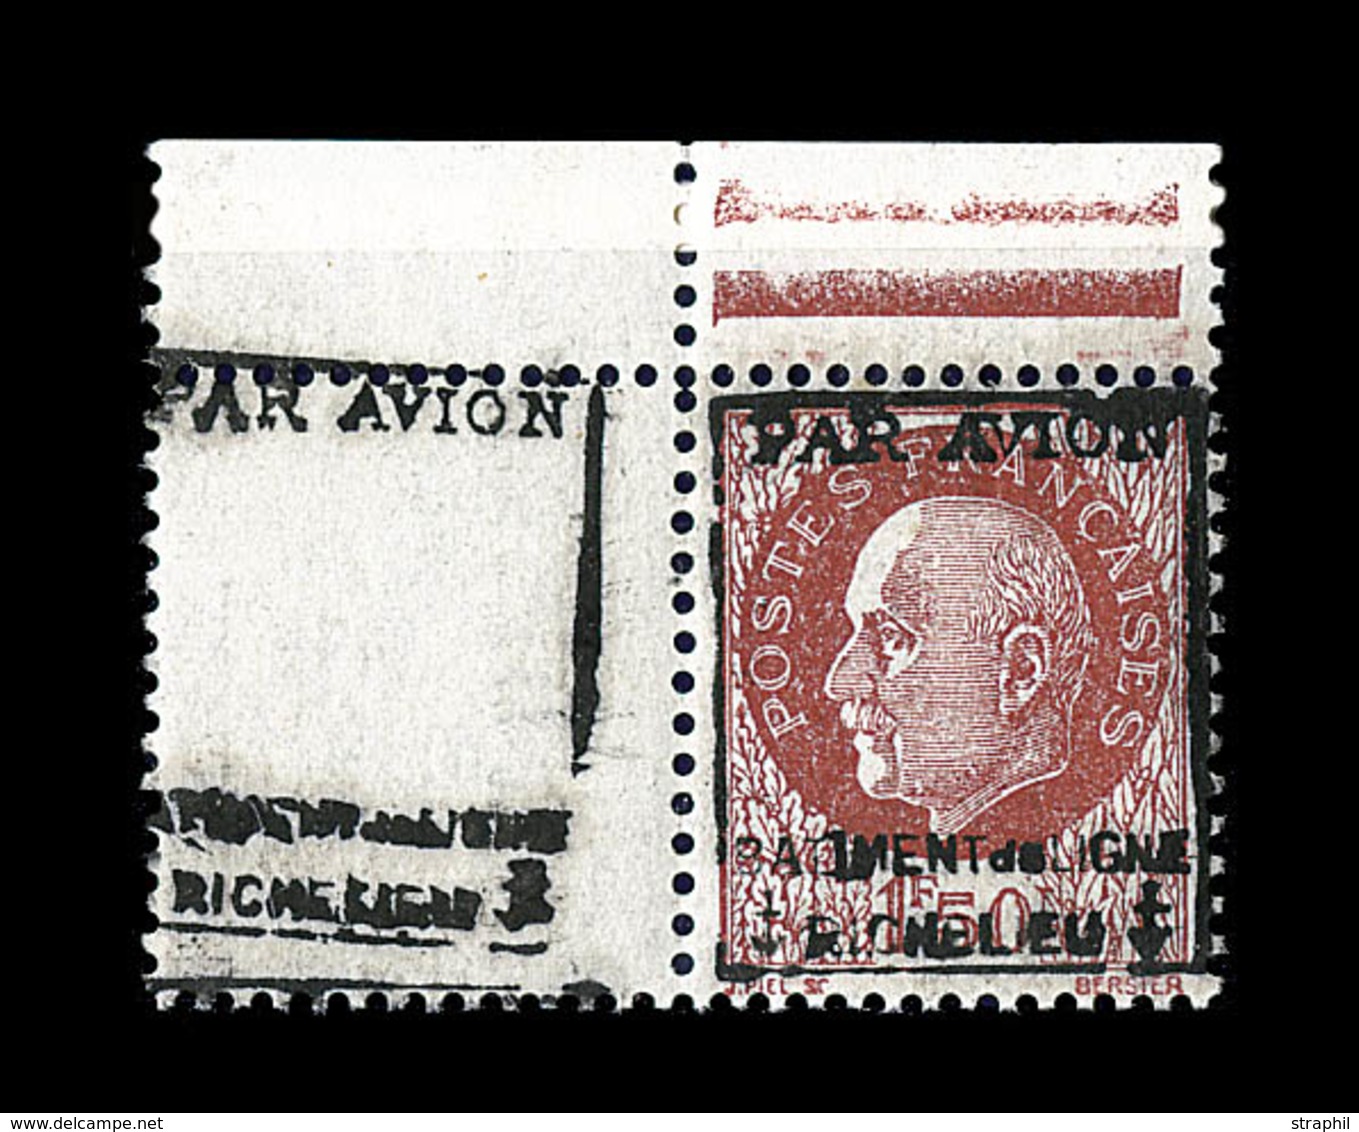 ** N°3 - 1F50 Brun Rouge - CDF - Surcharge S/Pont - Signé Calves - TB - Military Airmail